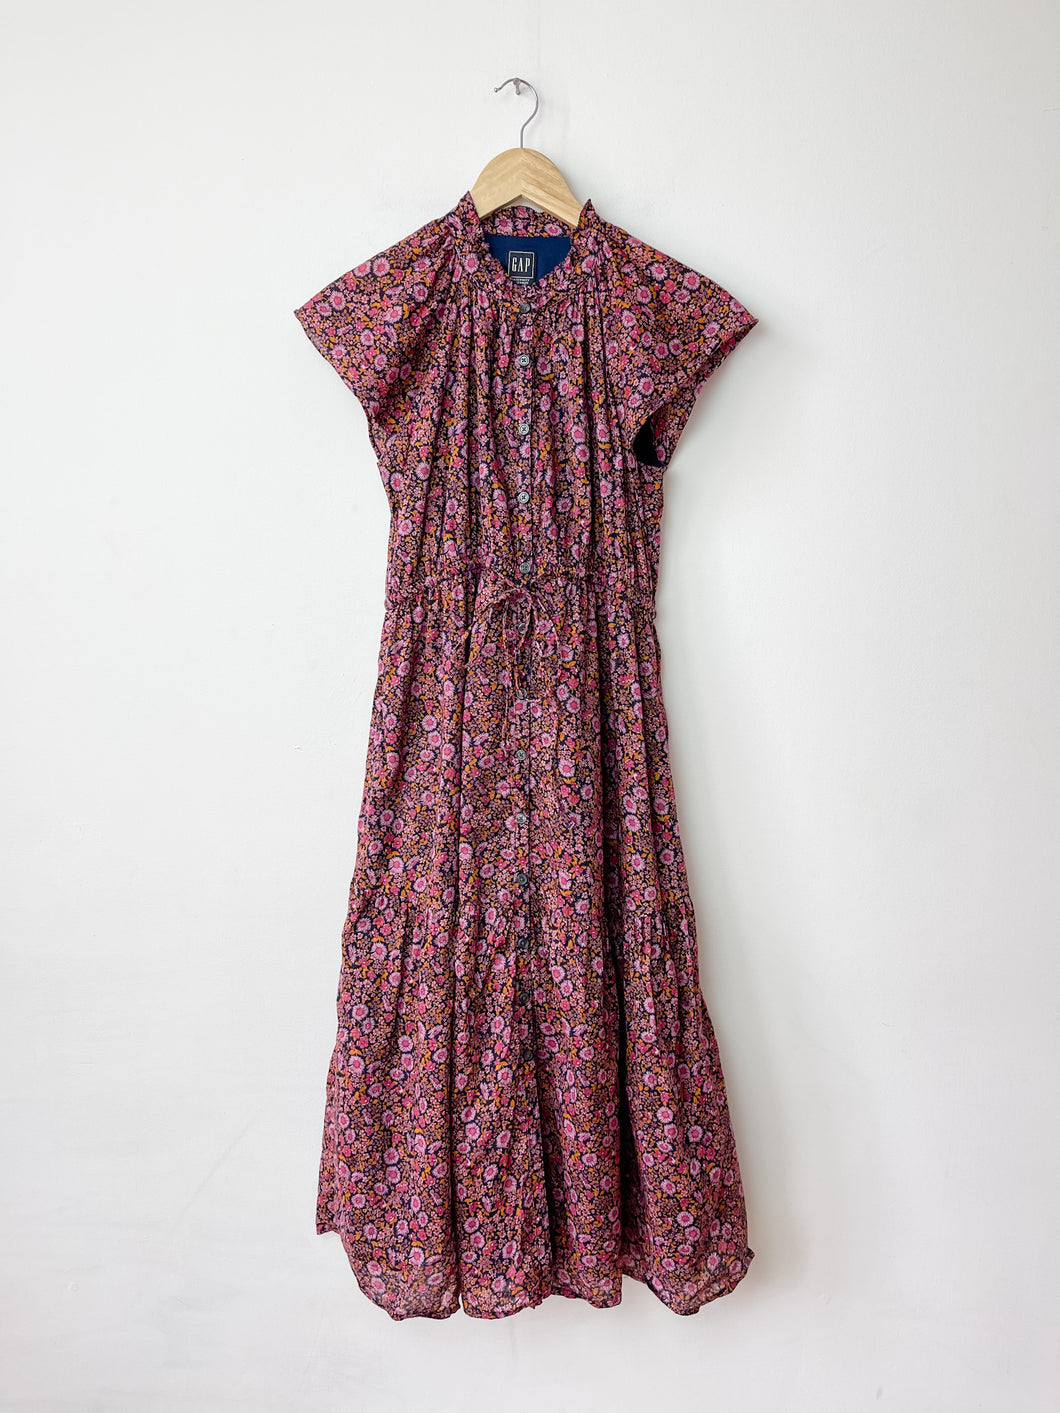 Maternity Floral Gap Dress Size Small